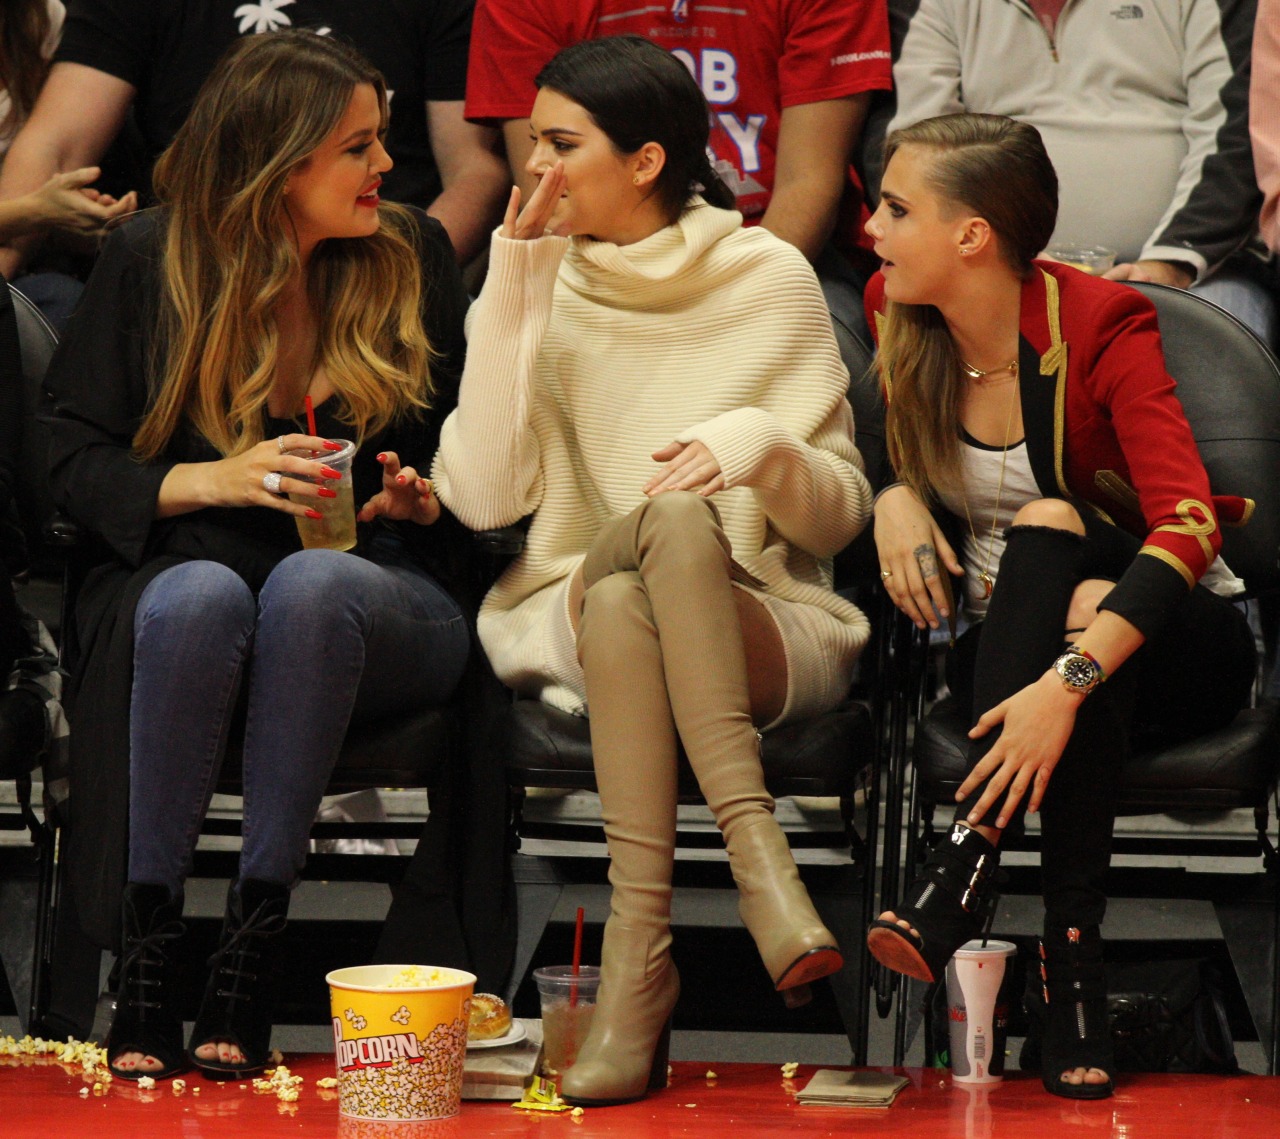 Kendall Jenner was seen enjoying the Lakers vs the Clippers